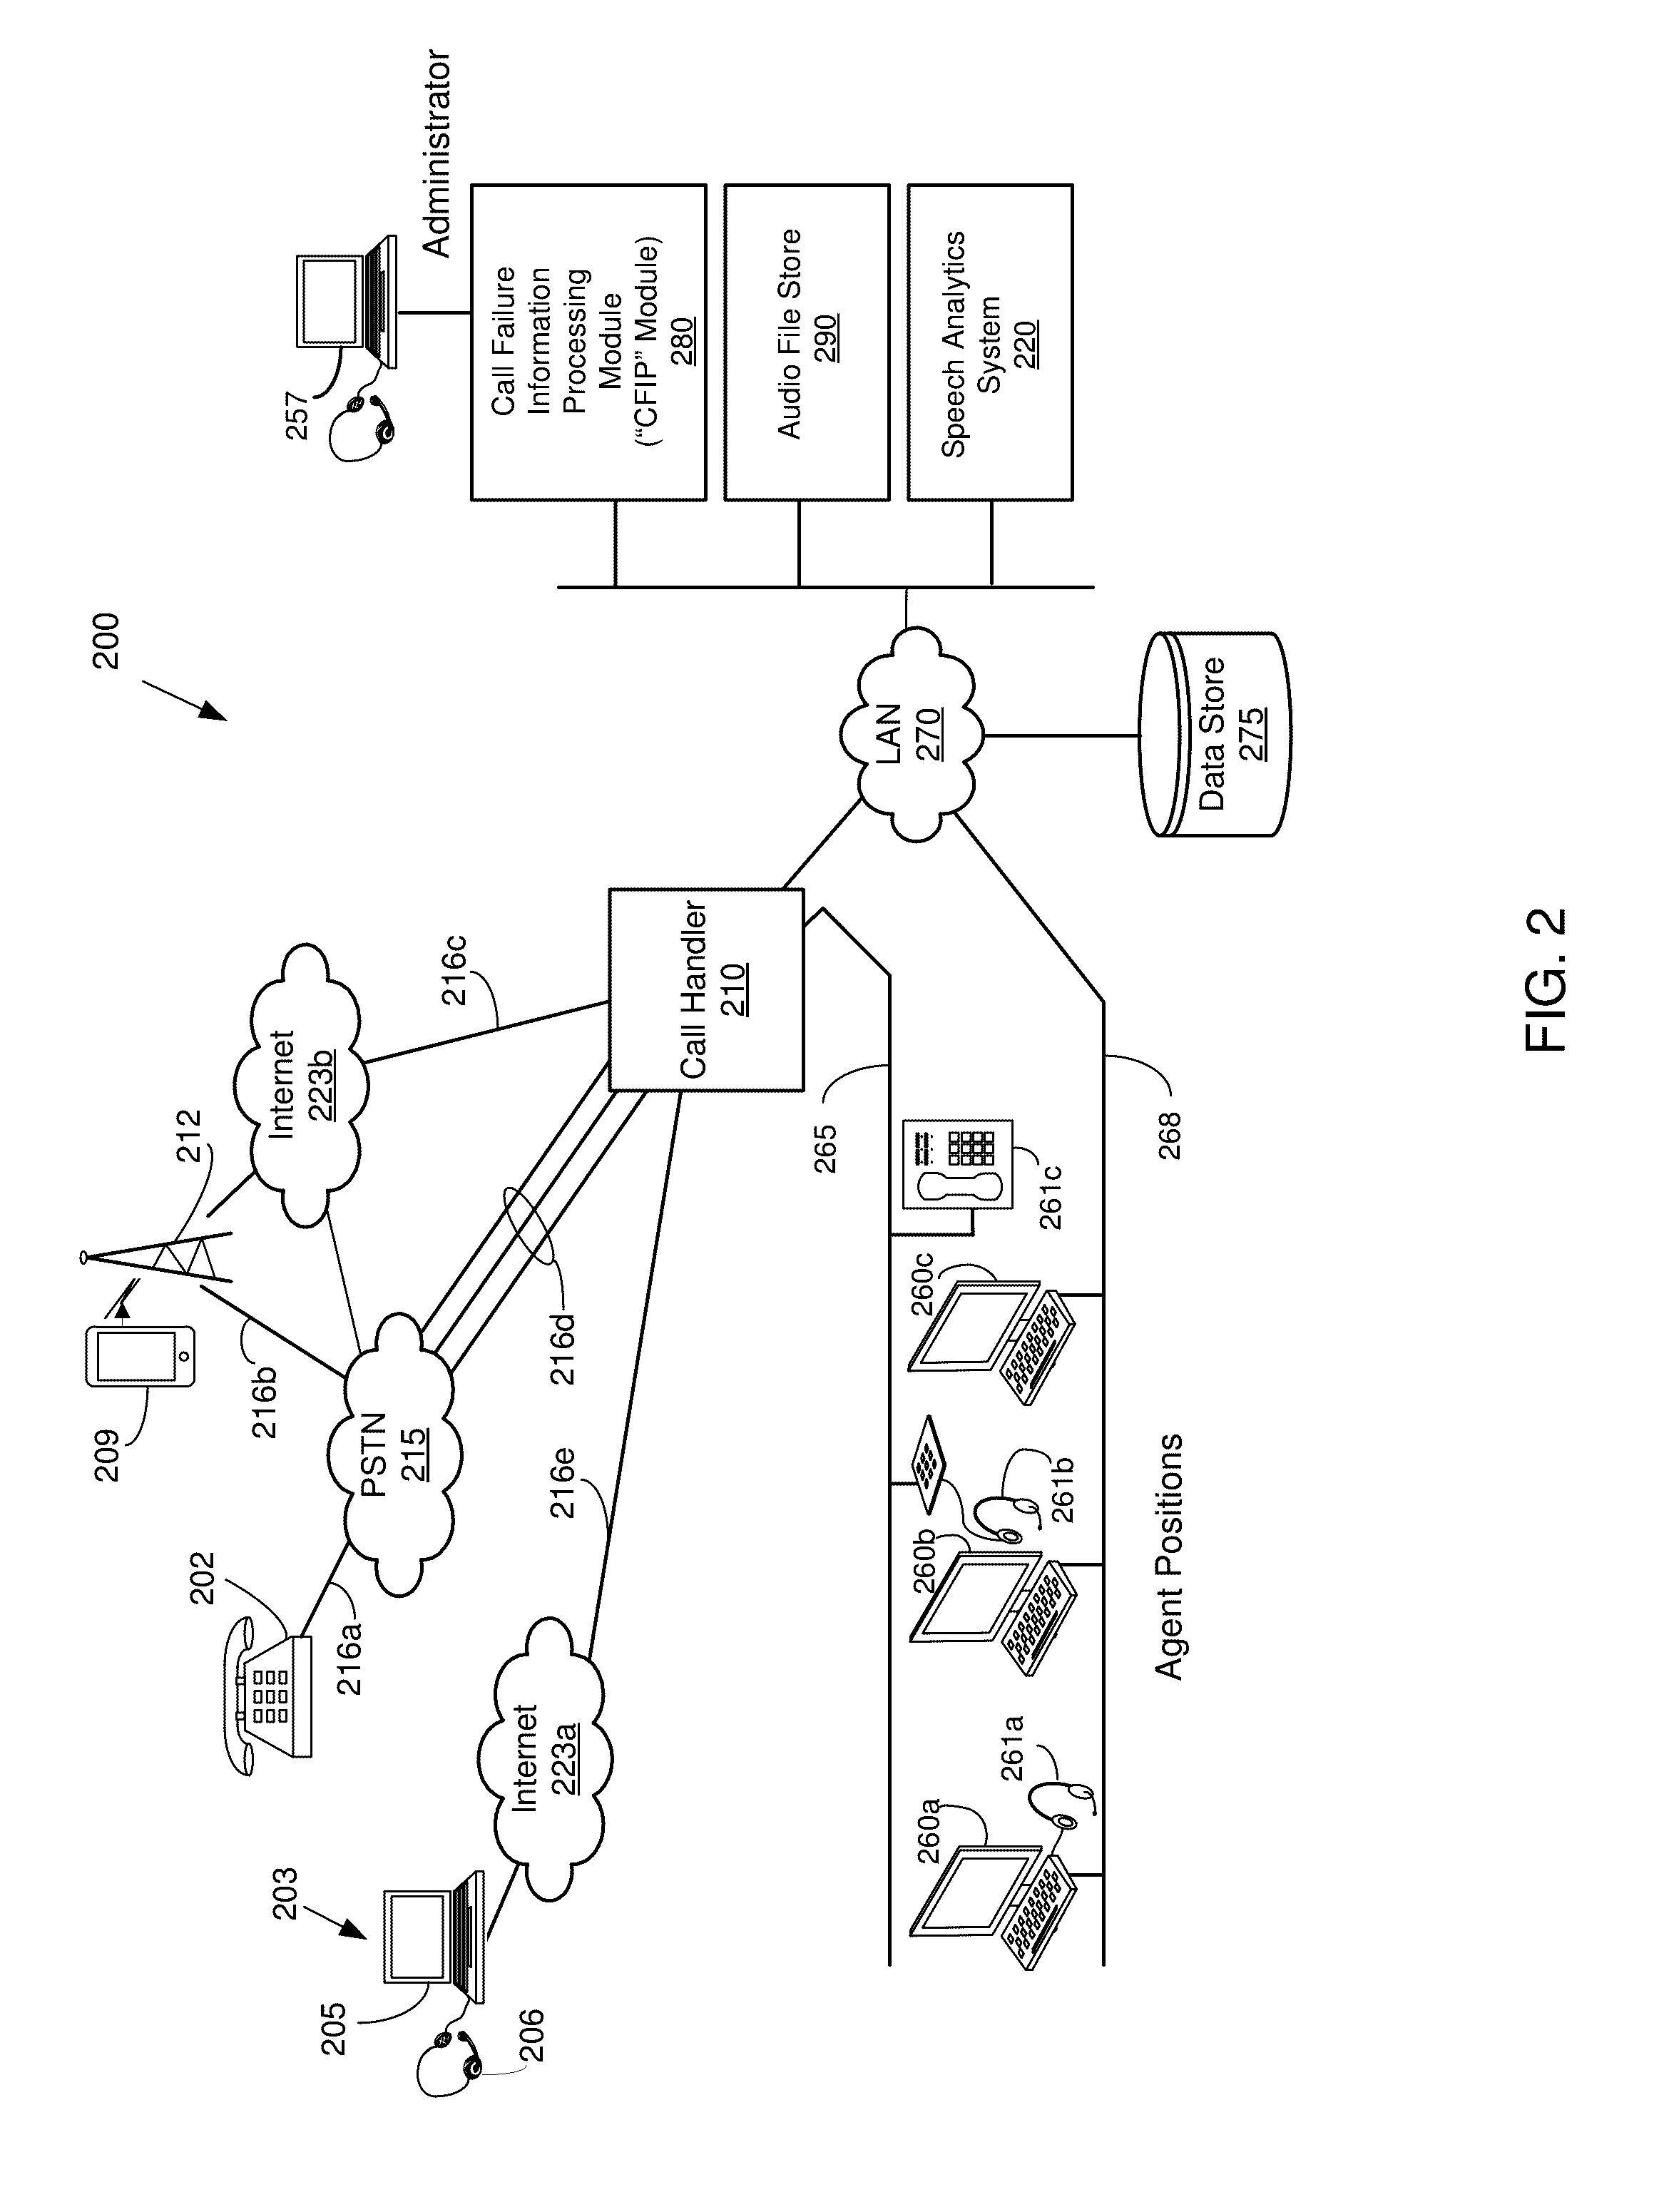 Accurate dispositioning of a telephone call by reconciliating cause codes with in-band audio information